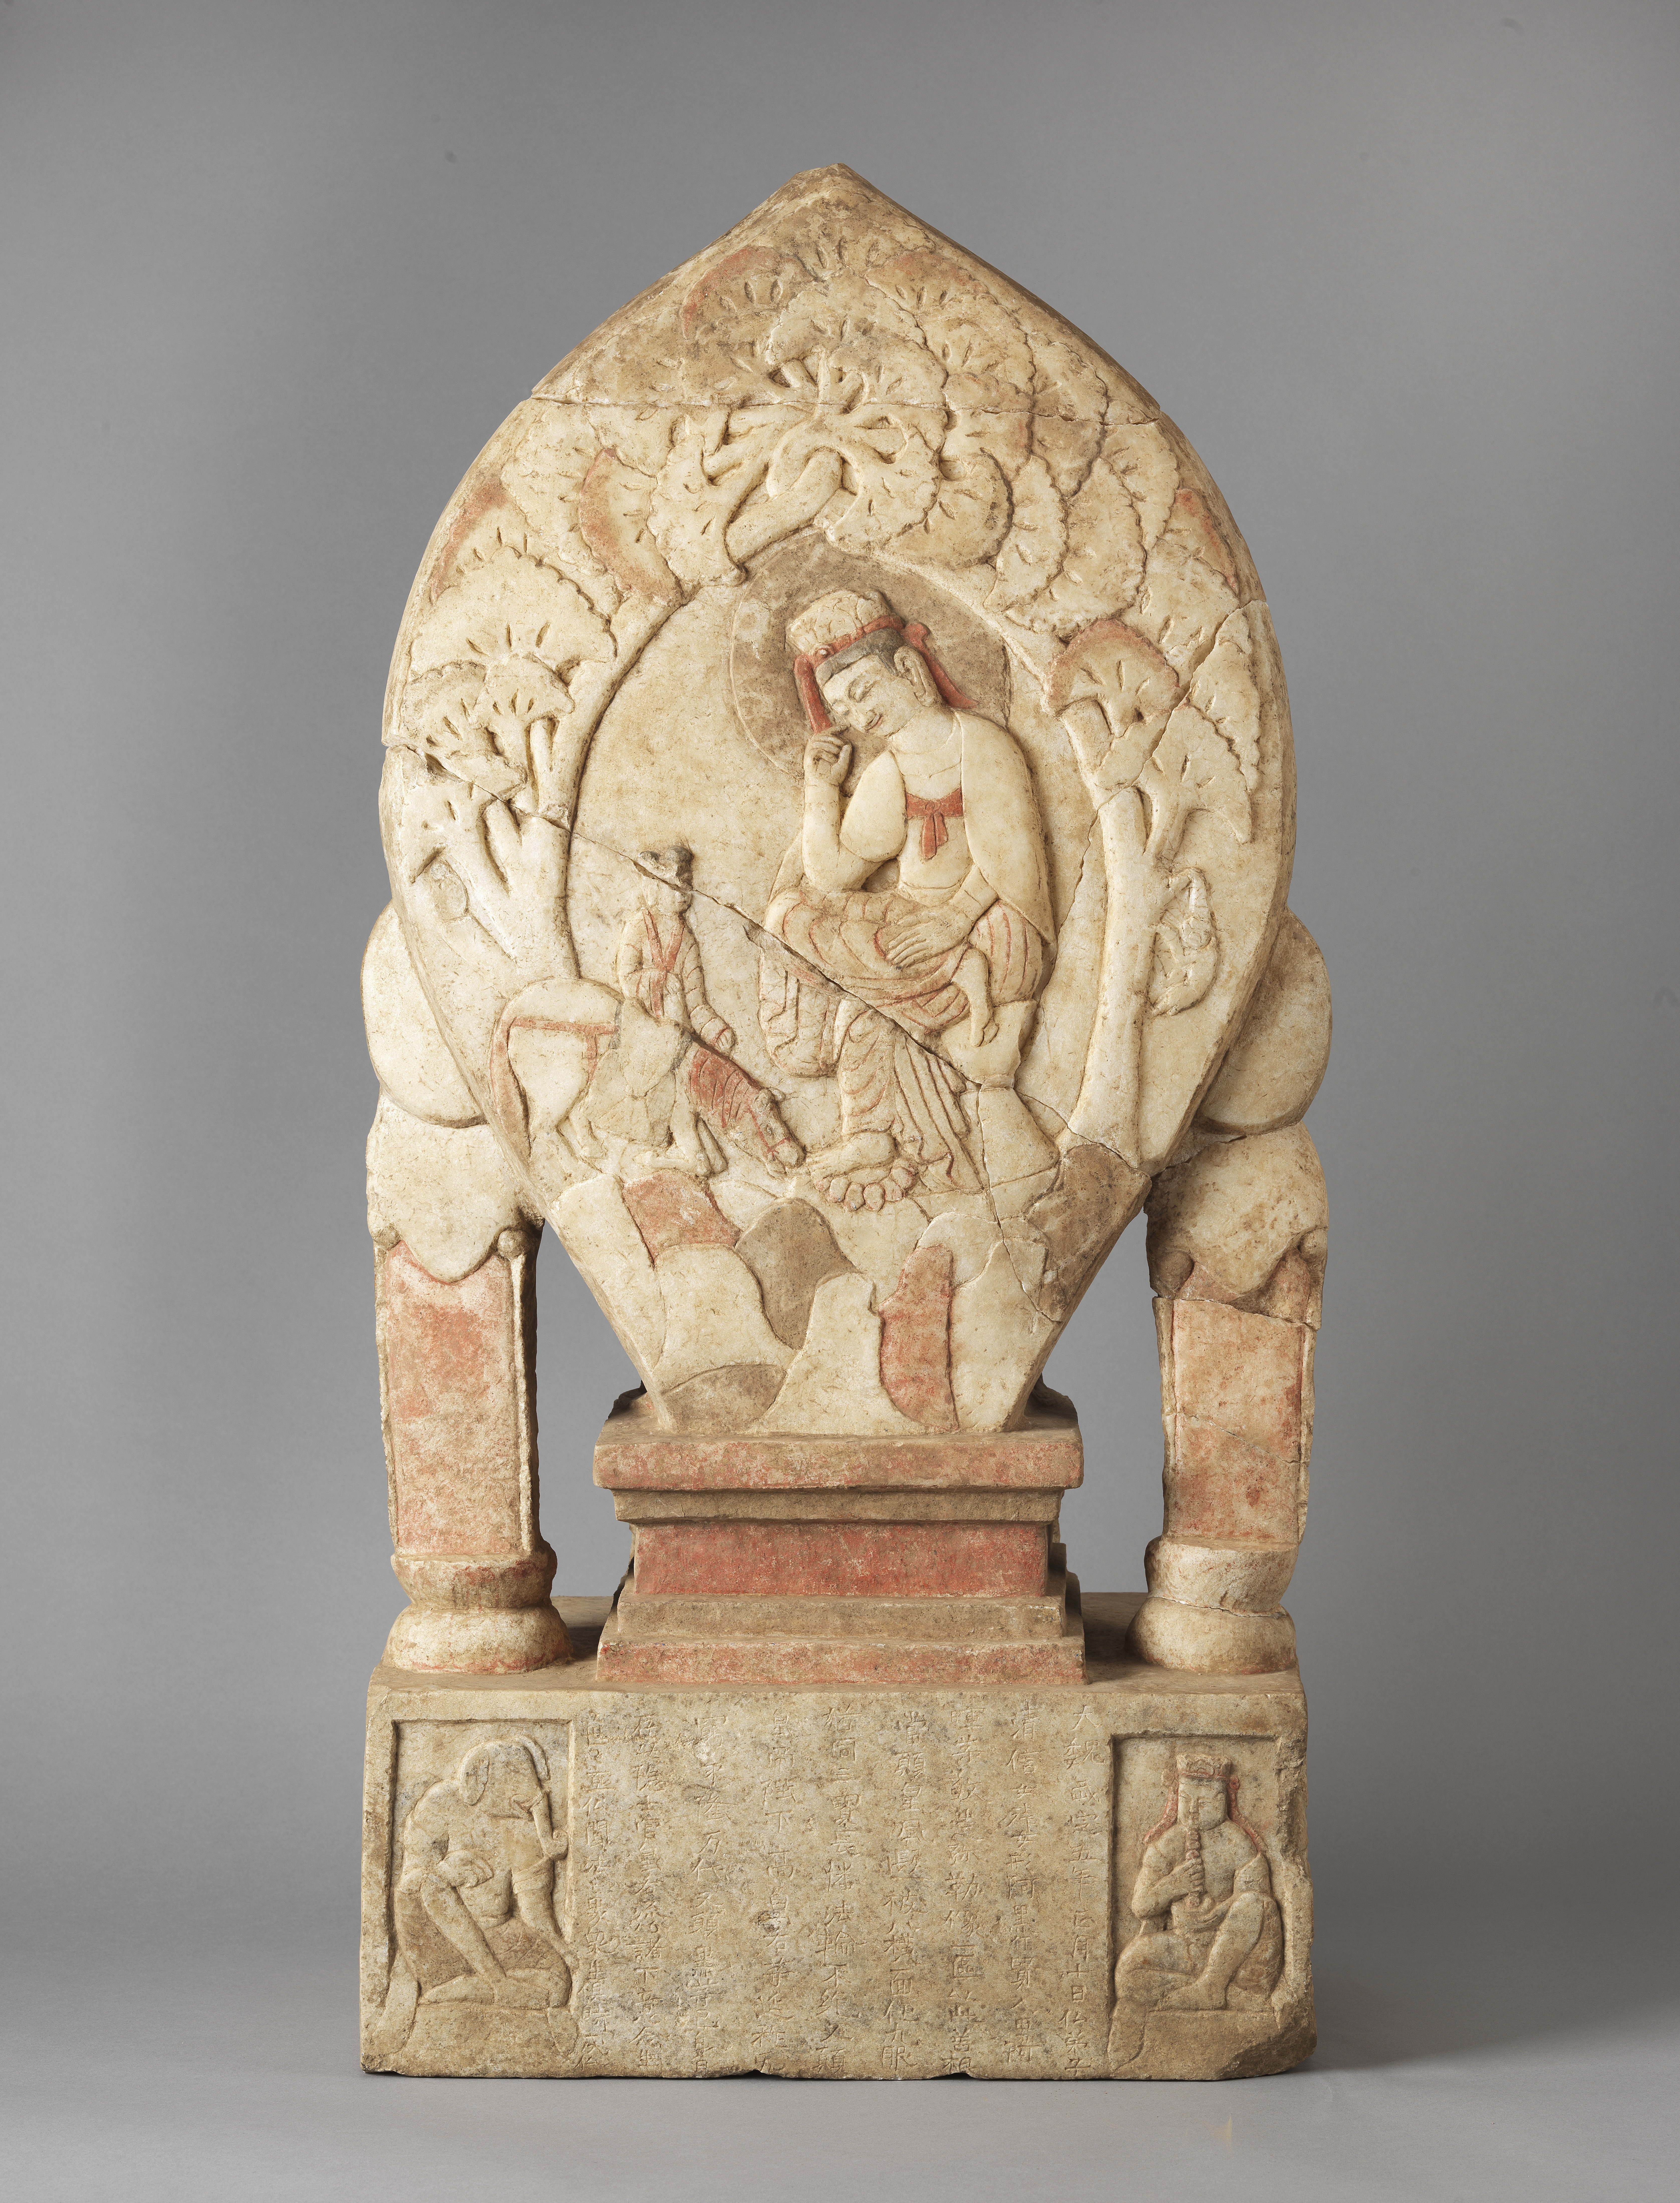 Pinkish-beige sculpture featuring almond-shaped nimbus with Bodhisattva inset; mounted on base and supported by two columns